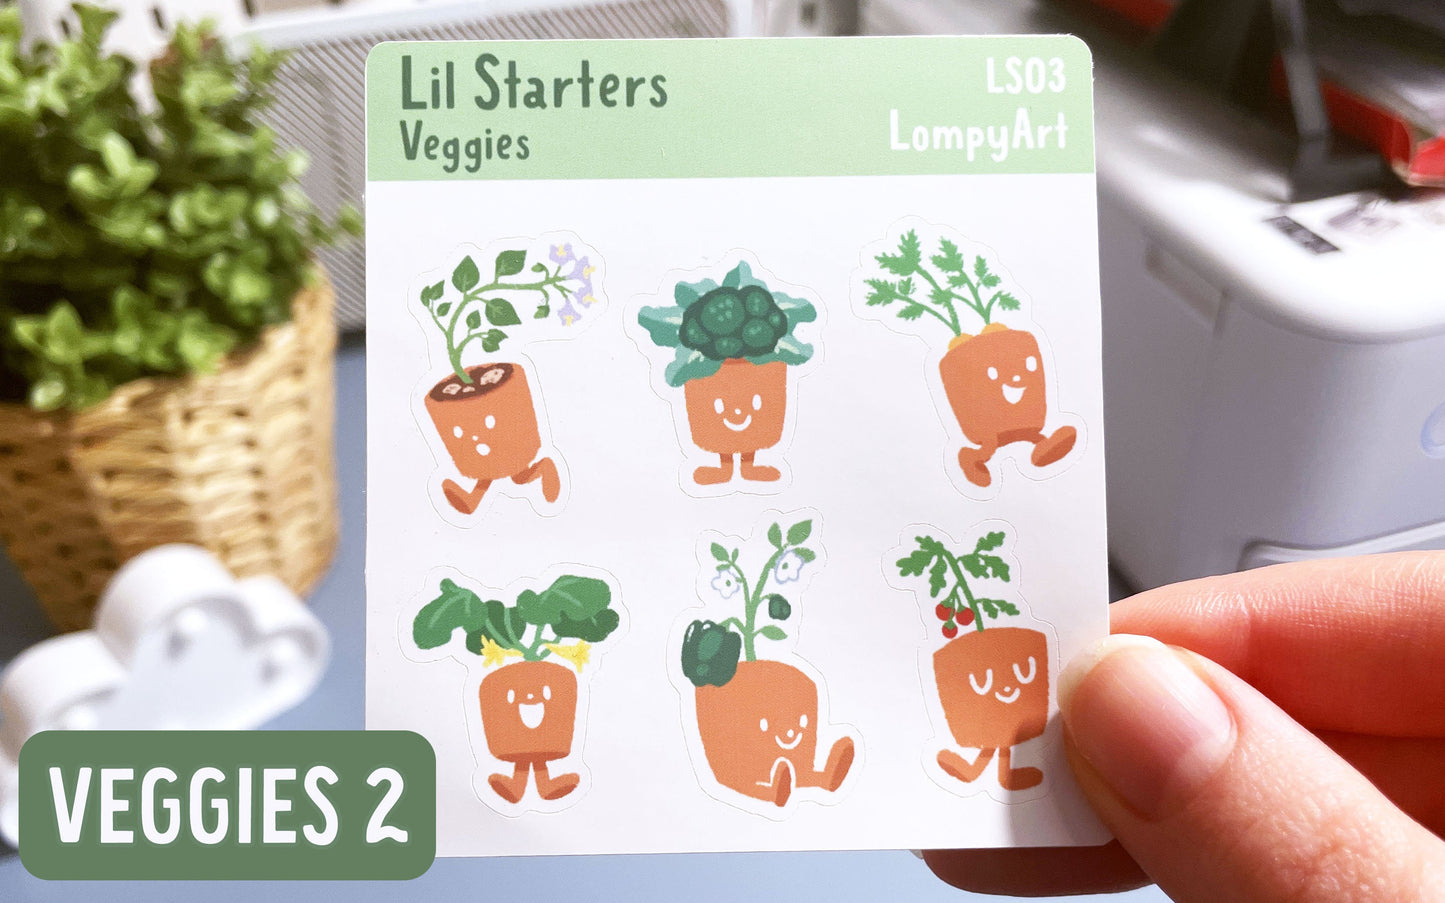 Fruit and Veggies Plant Stickers | Lil Starters | mini sticker sheet plant lover labels gift potted plants kawaii cute garden party favor